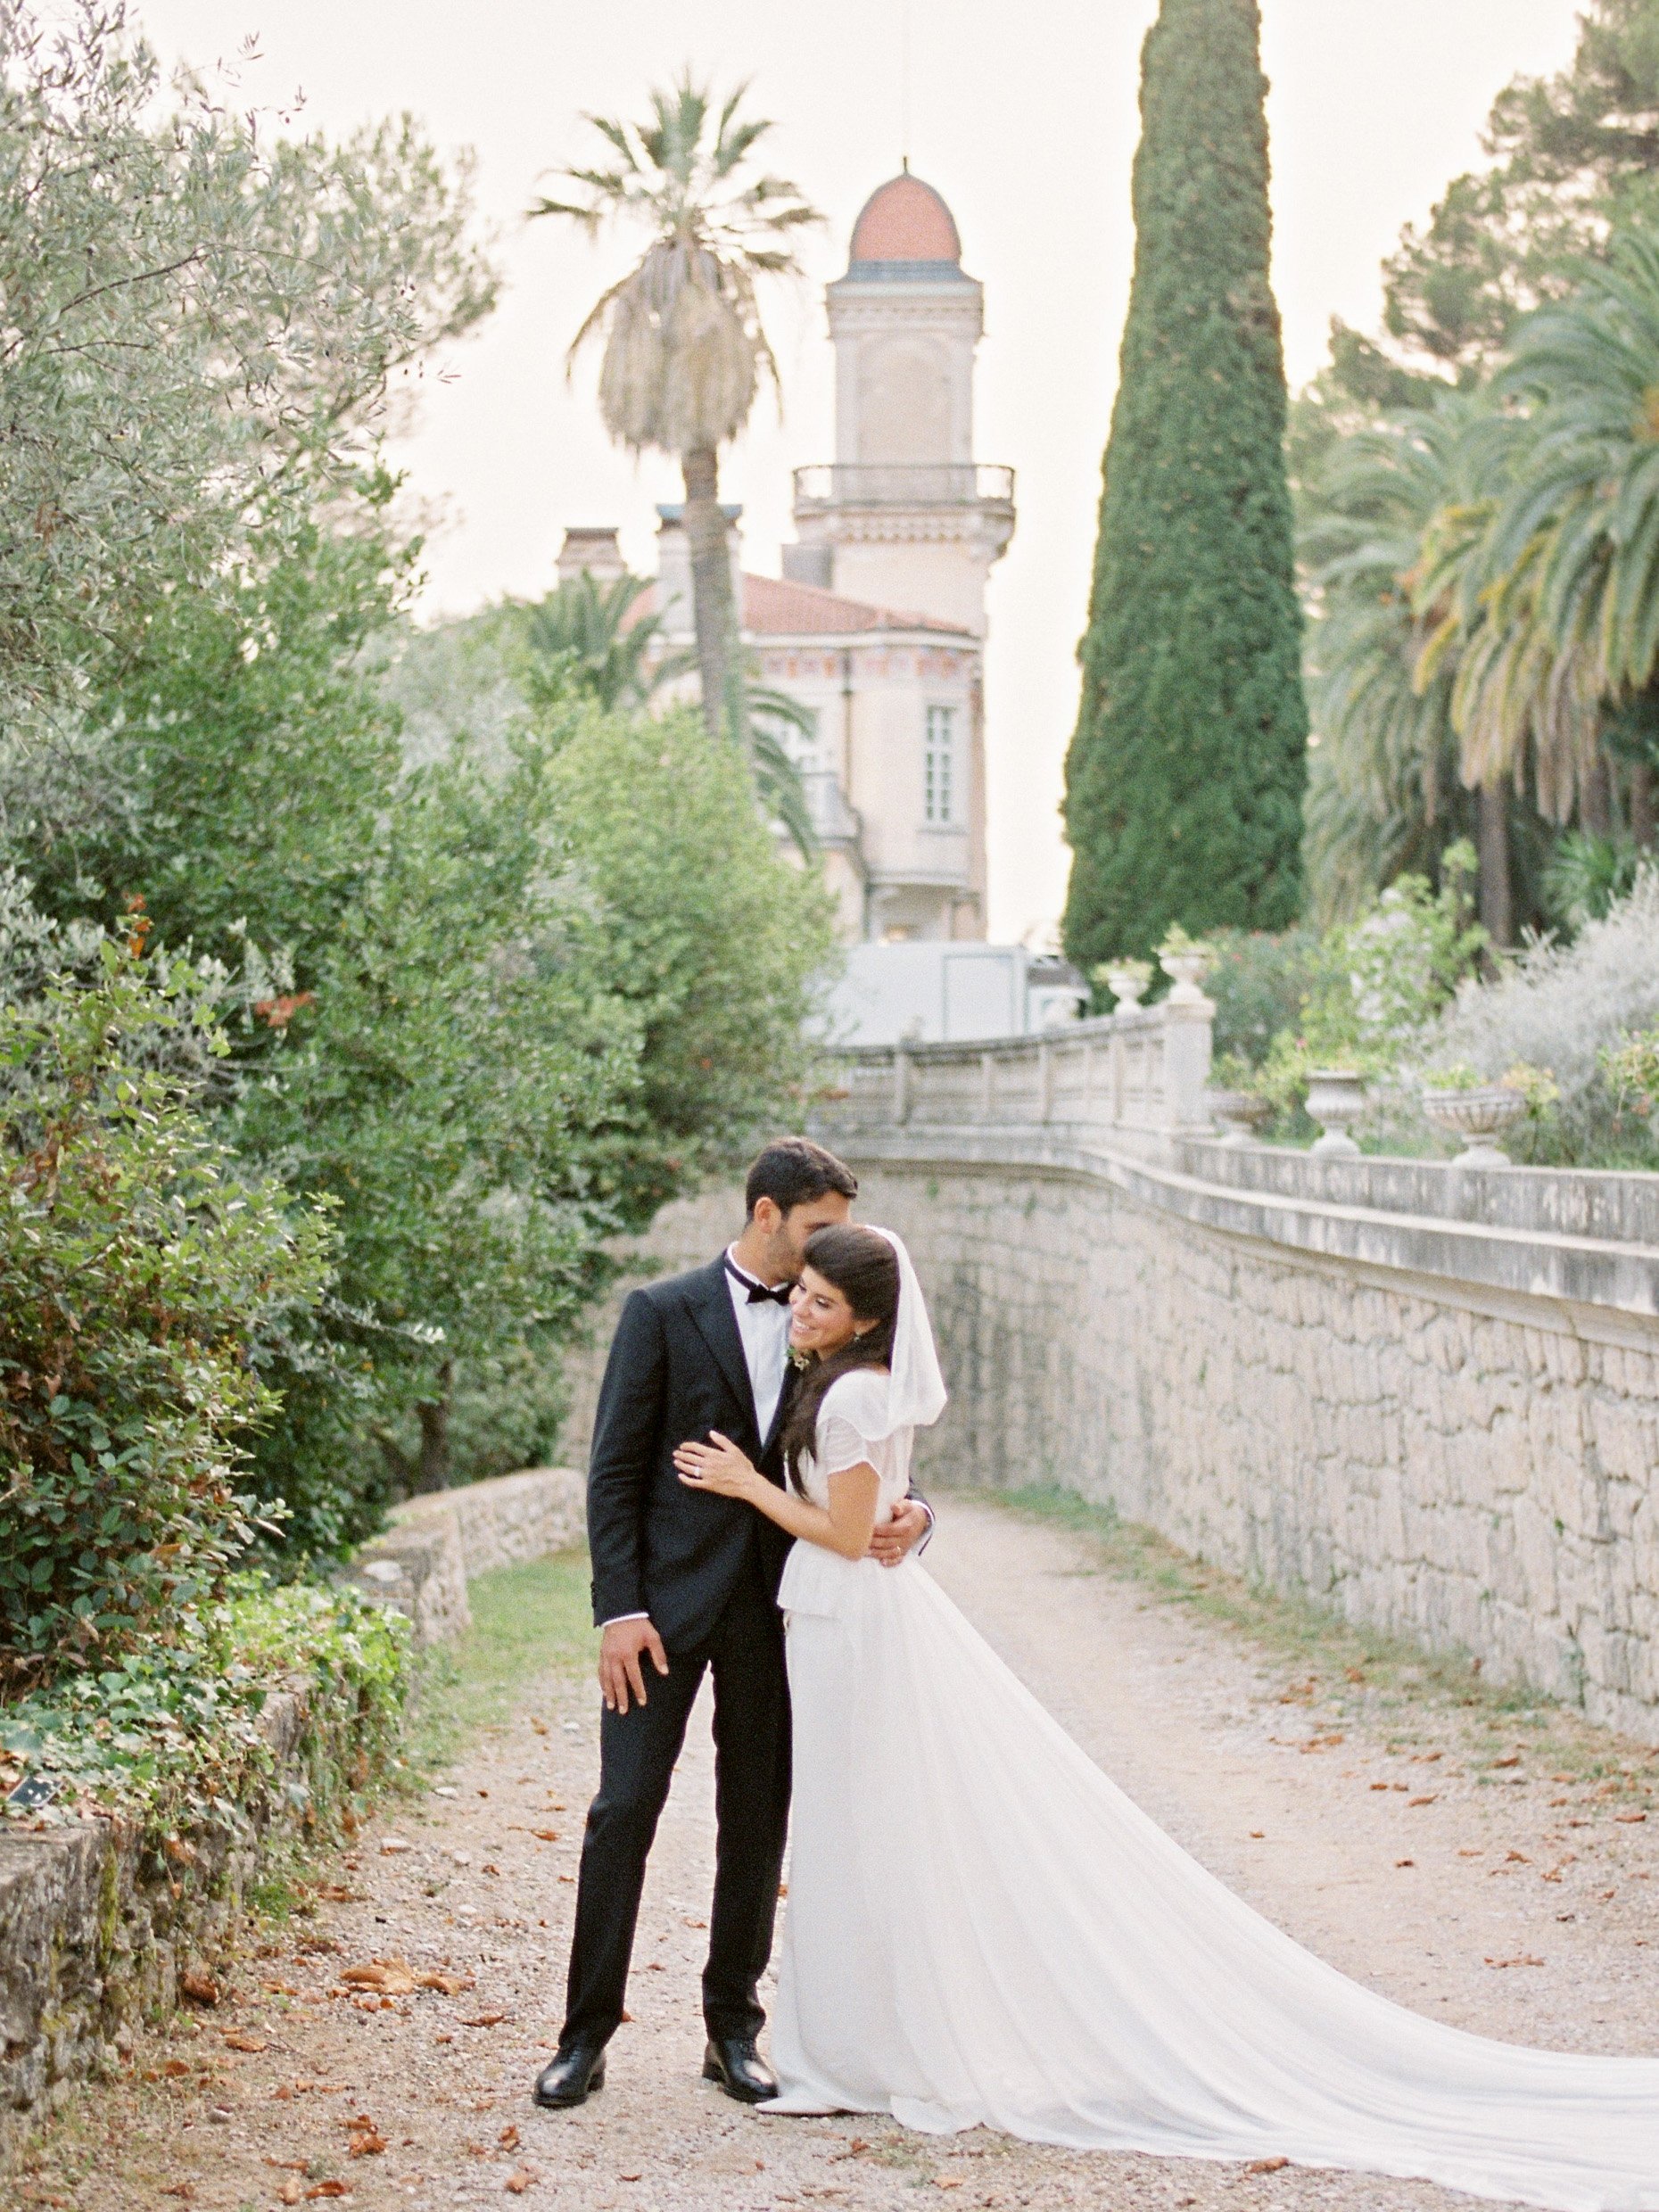 Romantic French wedding in Chateau Saint Georges